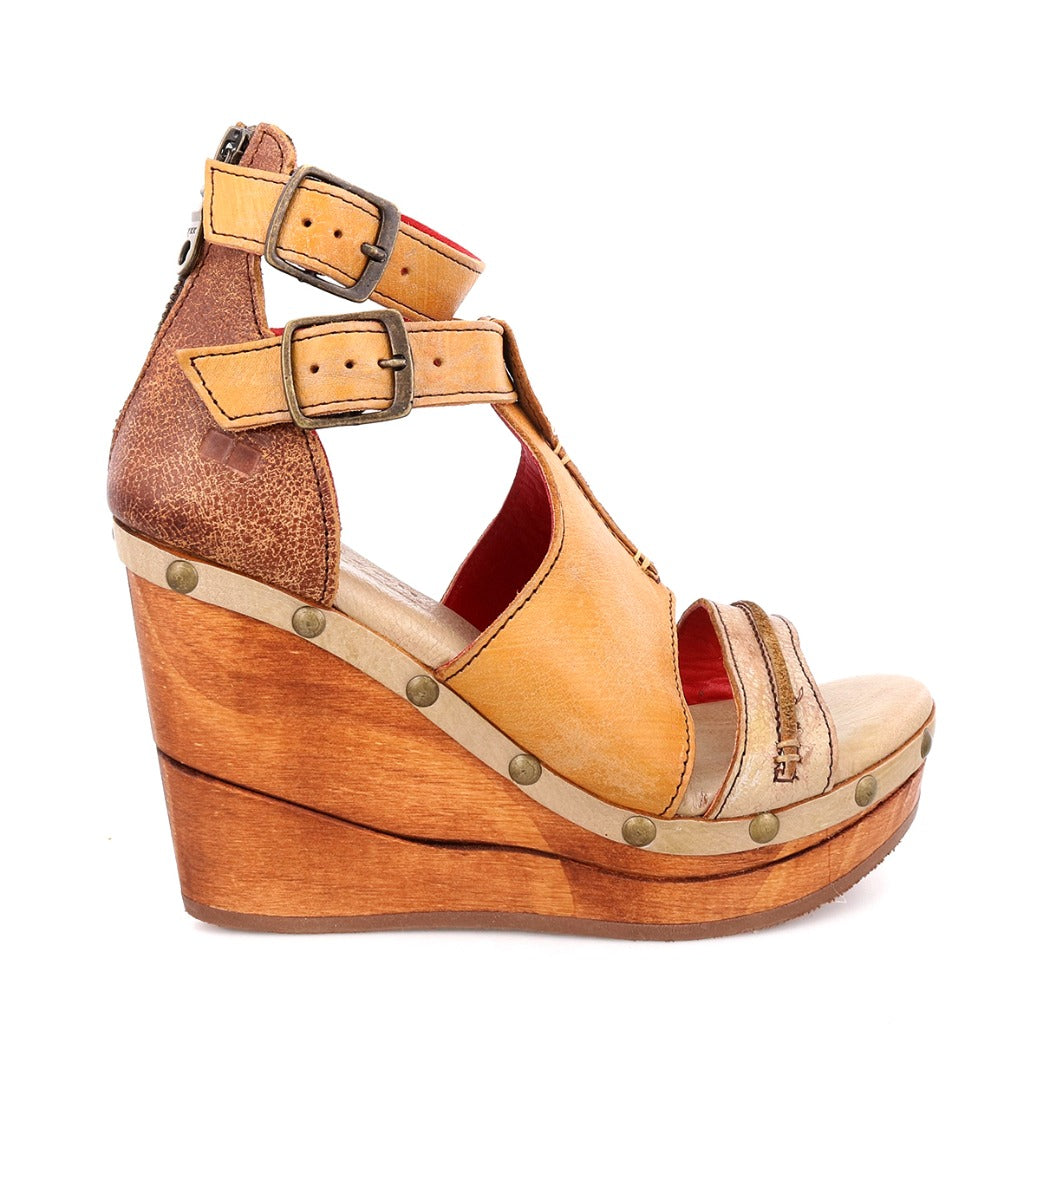 A women's wedge sandal with straps called Princess by Bed Stu.